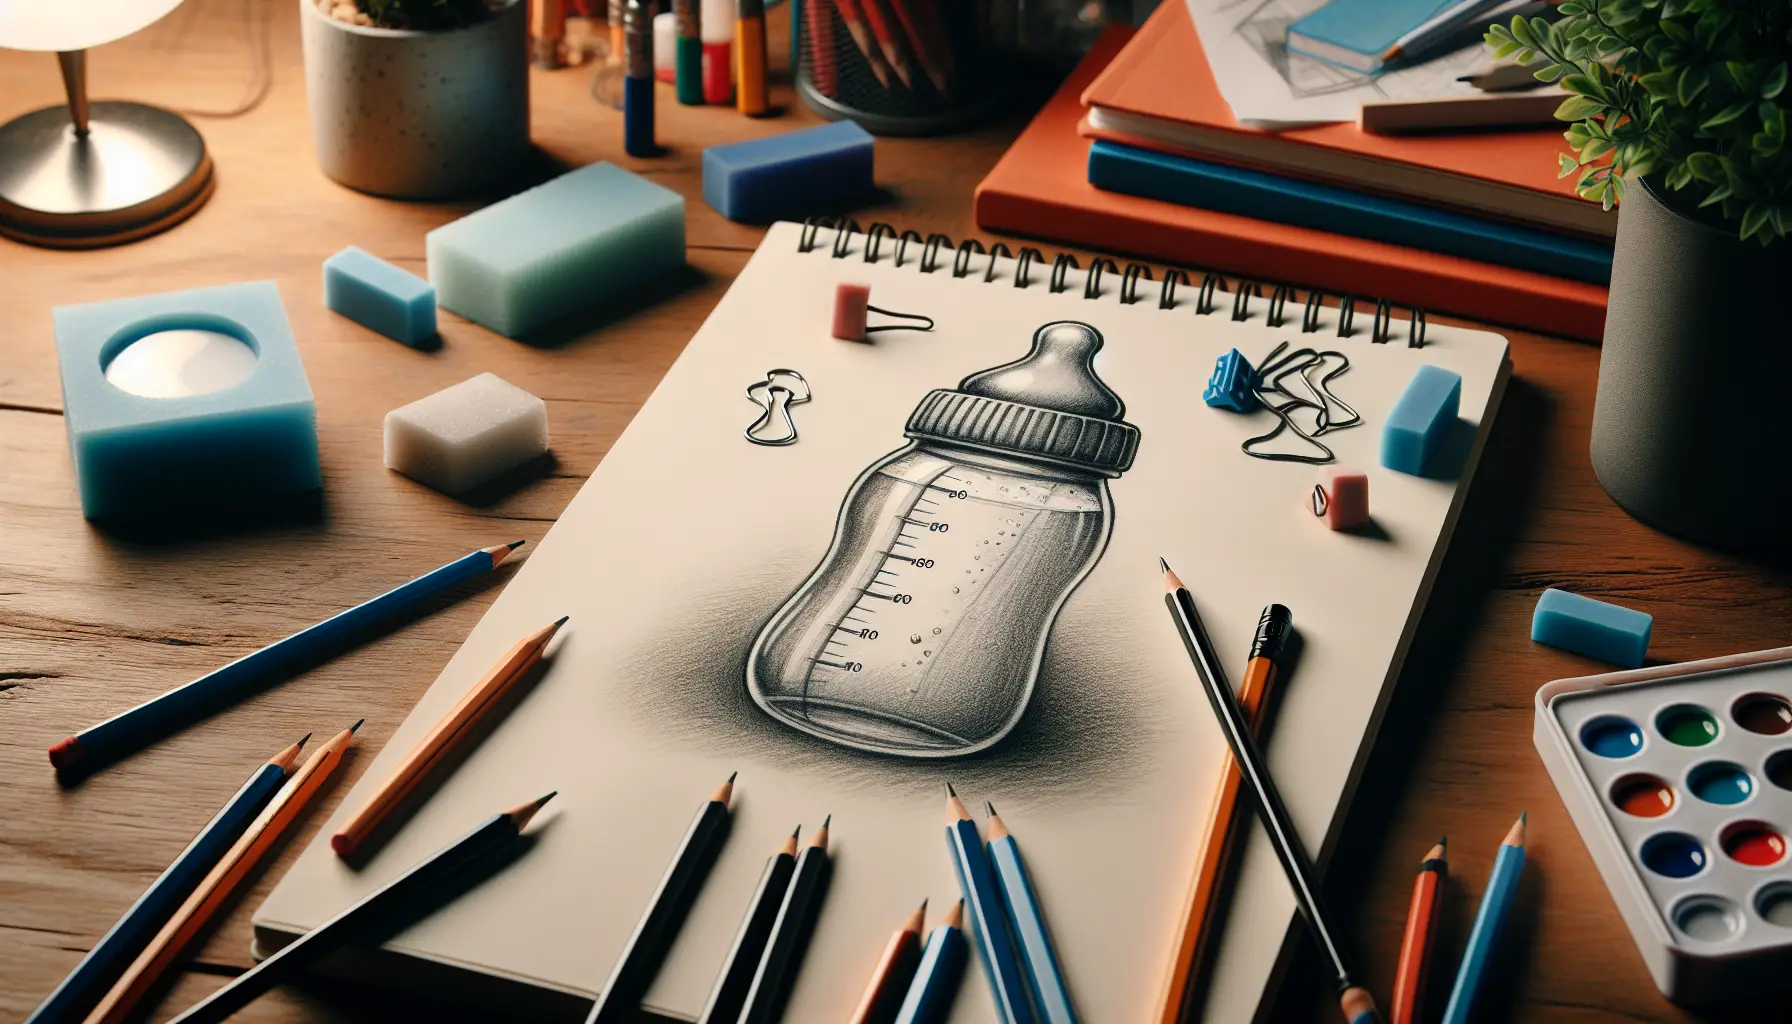 How To Draw A Baby Bottle